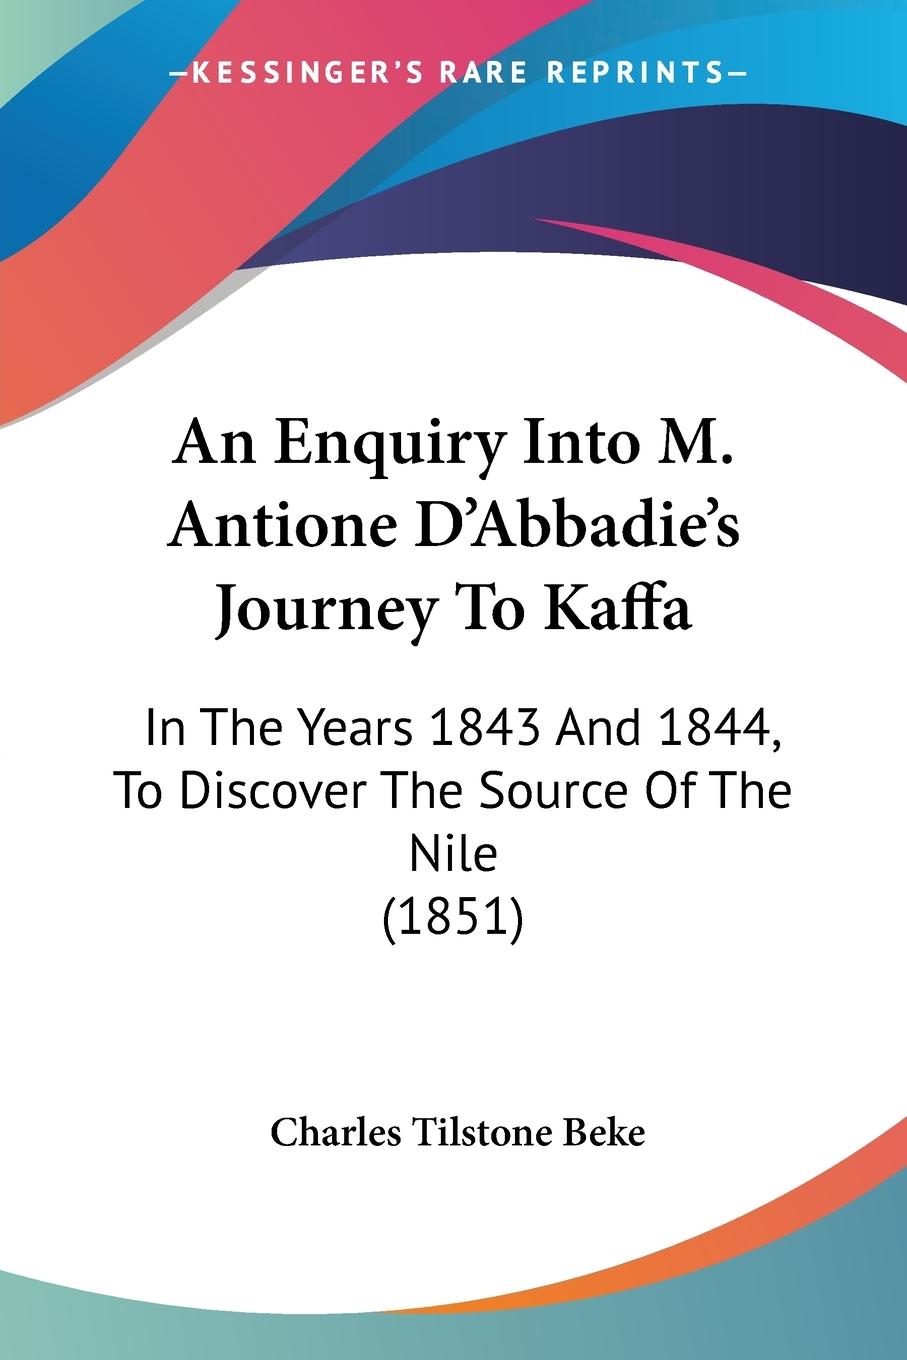 An Enquiry Into M. Antione D Abbadie s Journey To Kaffa - Beke, Charles Tilstone